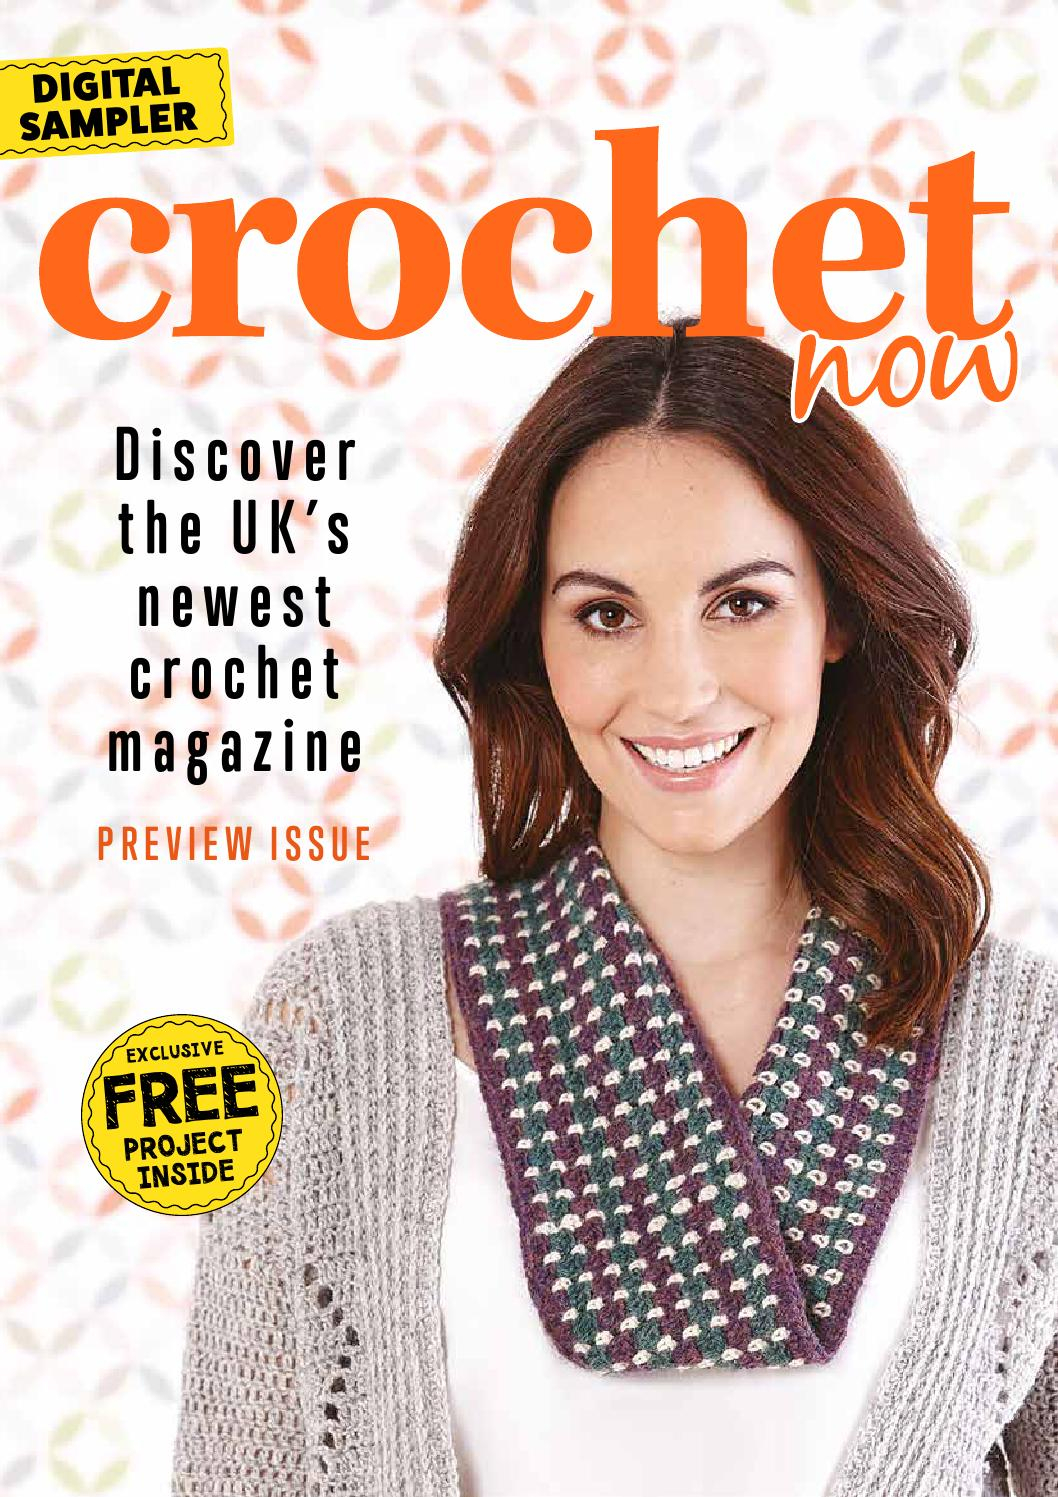 Knit And Crochet Now Patterns Crochet Now Sampler Practical Publishing Issuu